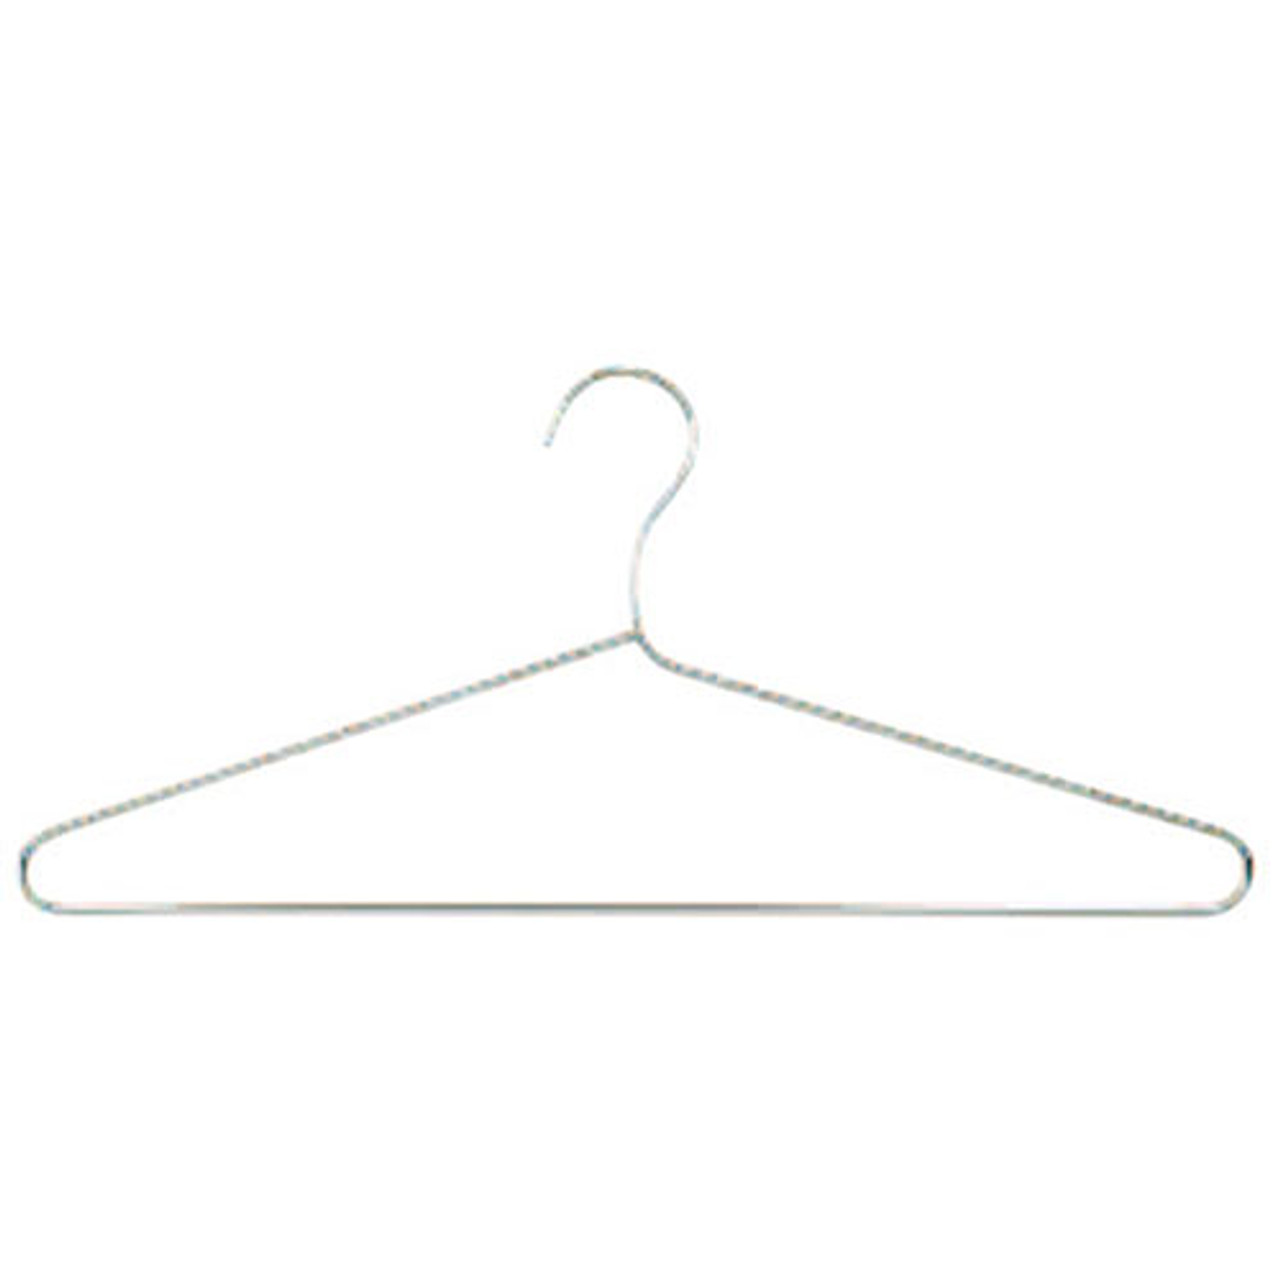 Magnuson Package of 100 Hangers (MG-17PM)